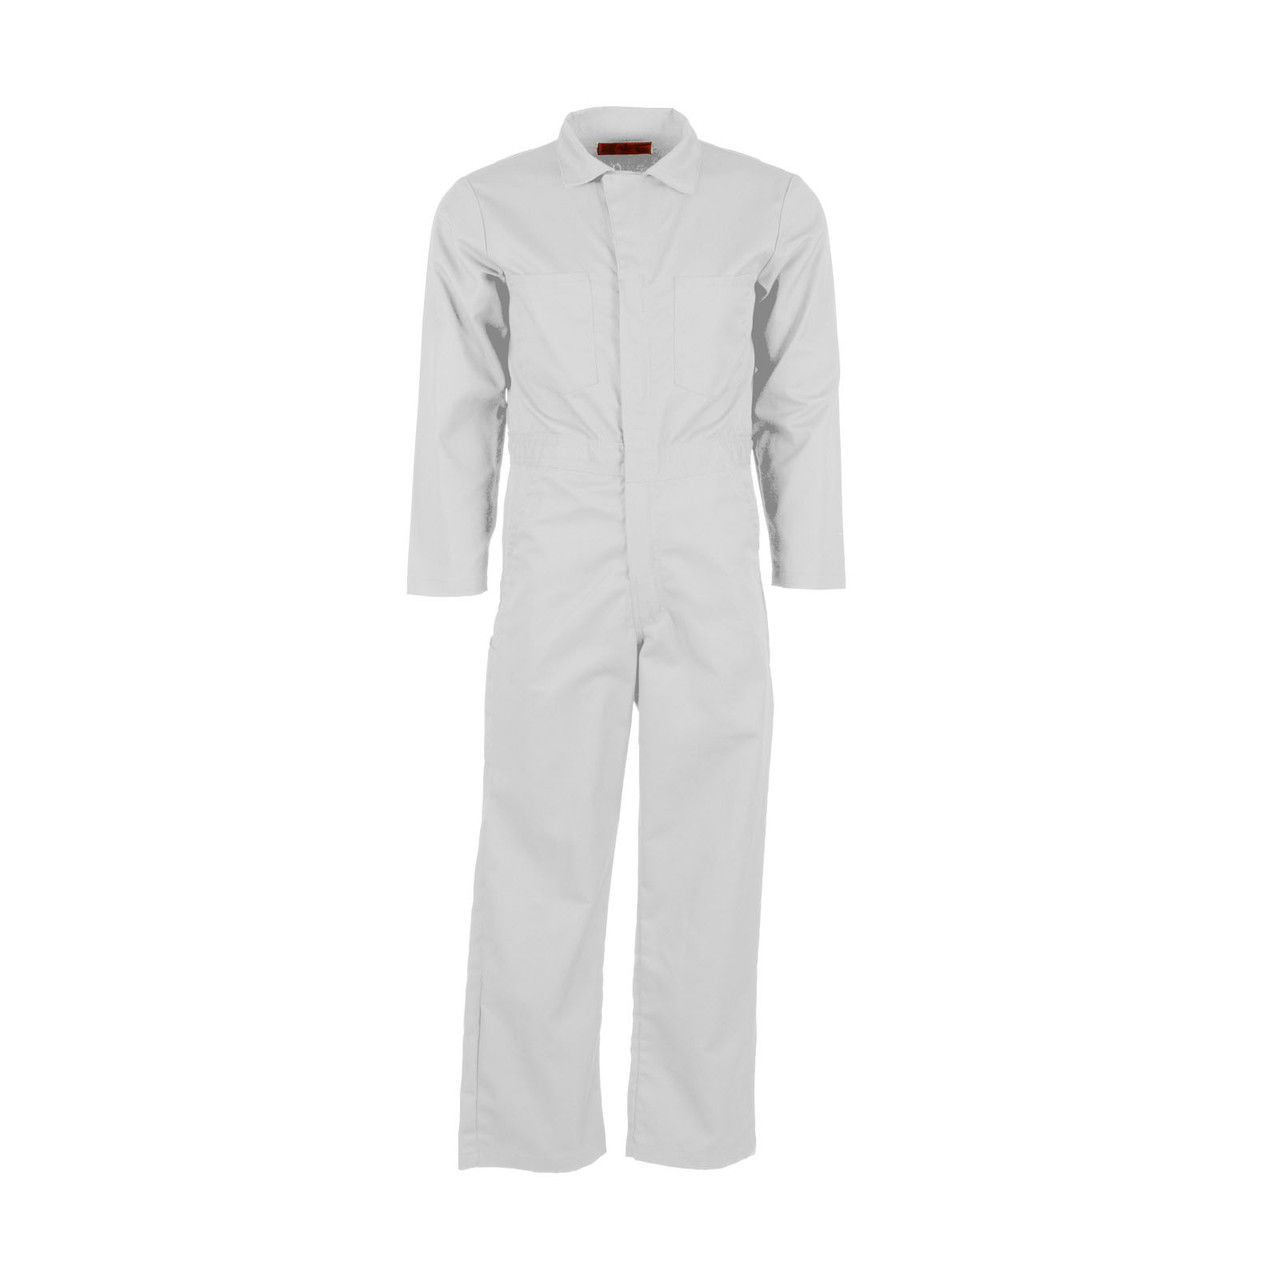 From where do the white coveralls of the CV10WH ship?